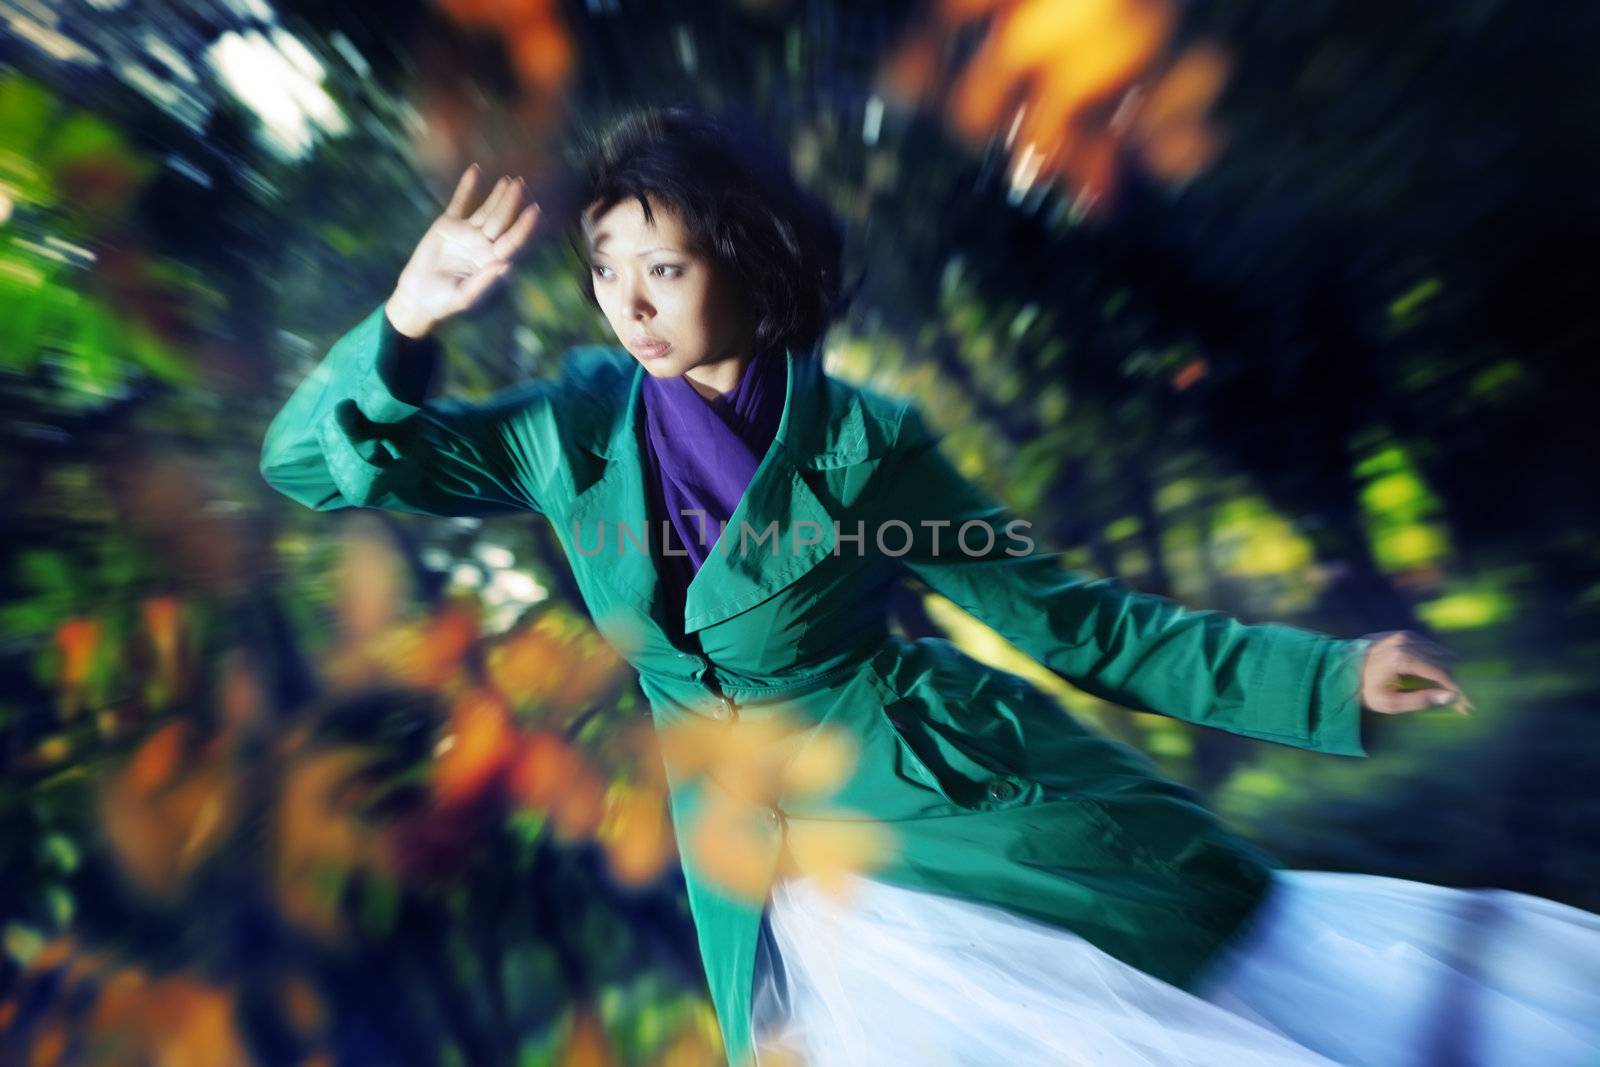 Lady outdoors in autumn. Photo with zoom-in blur effect